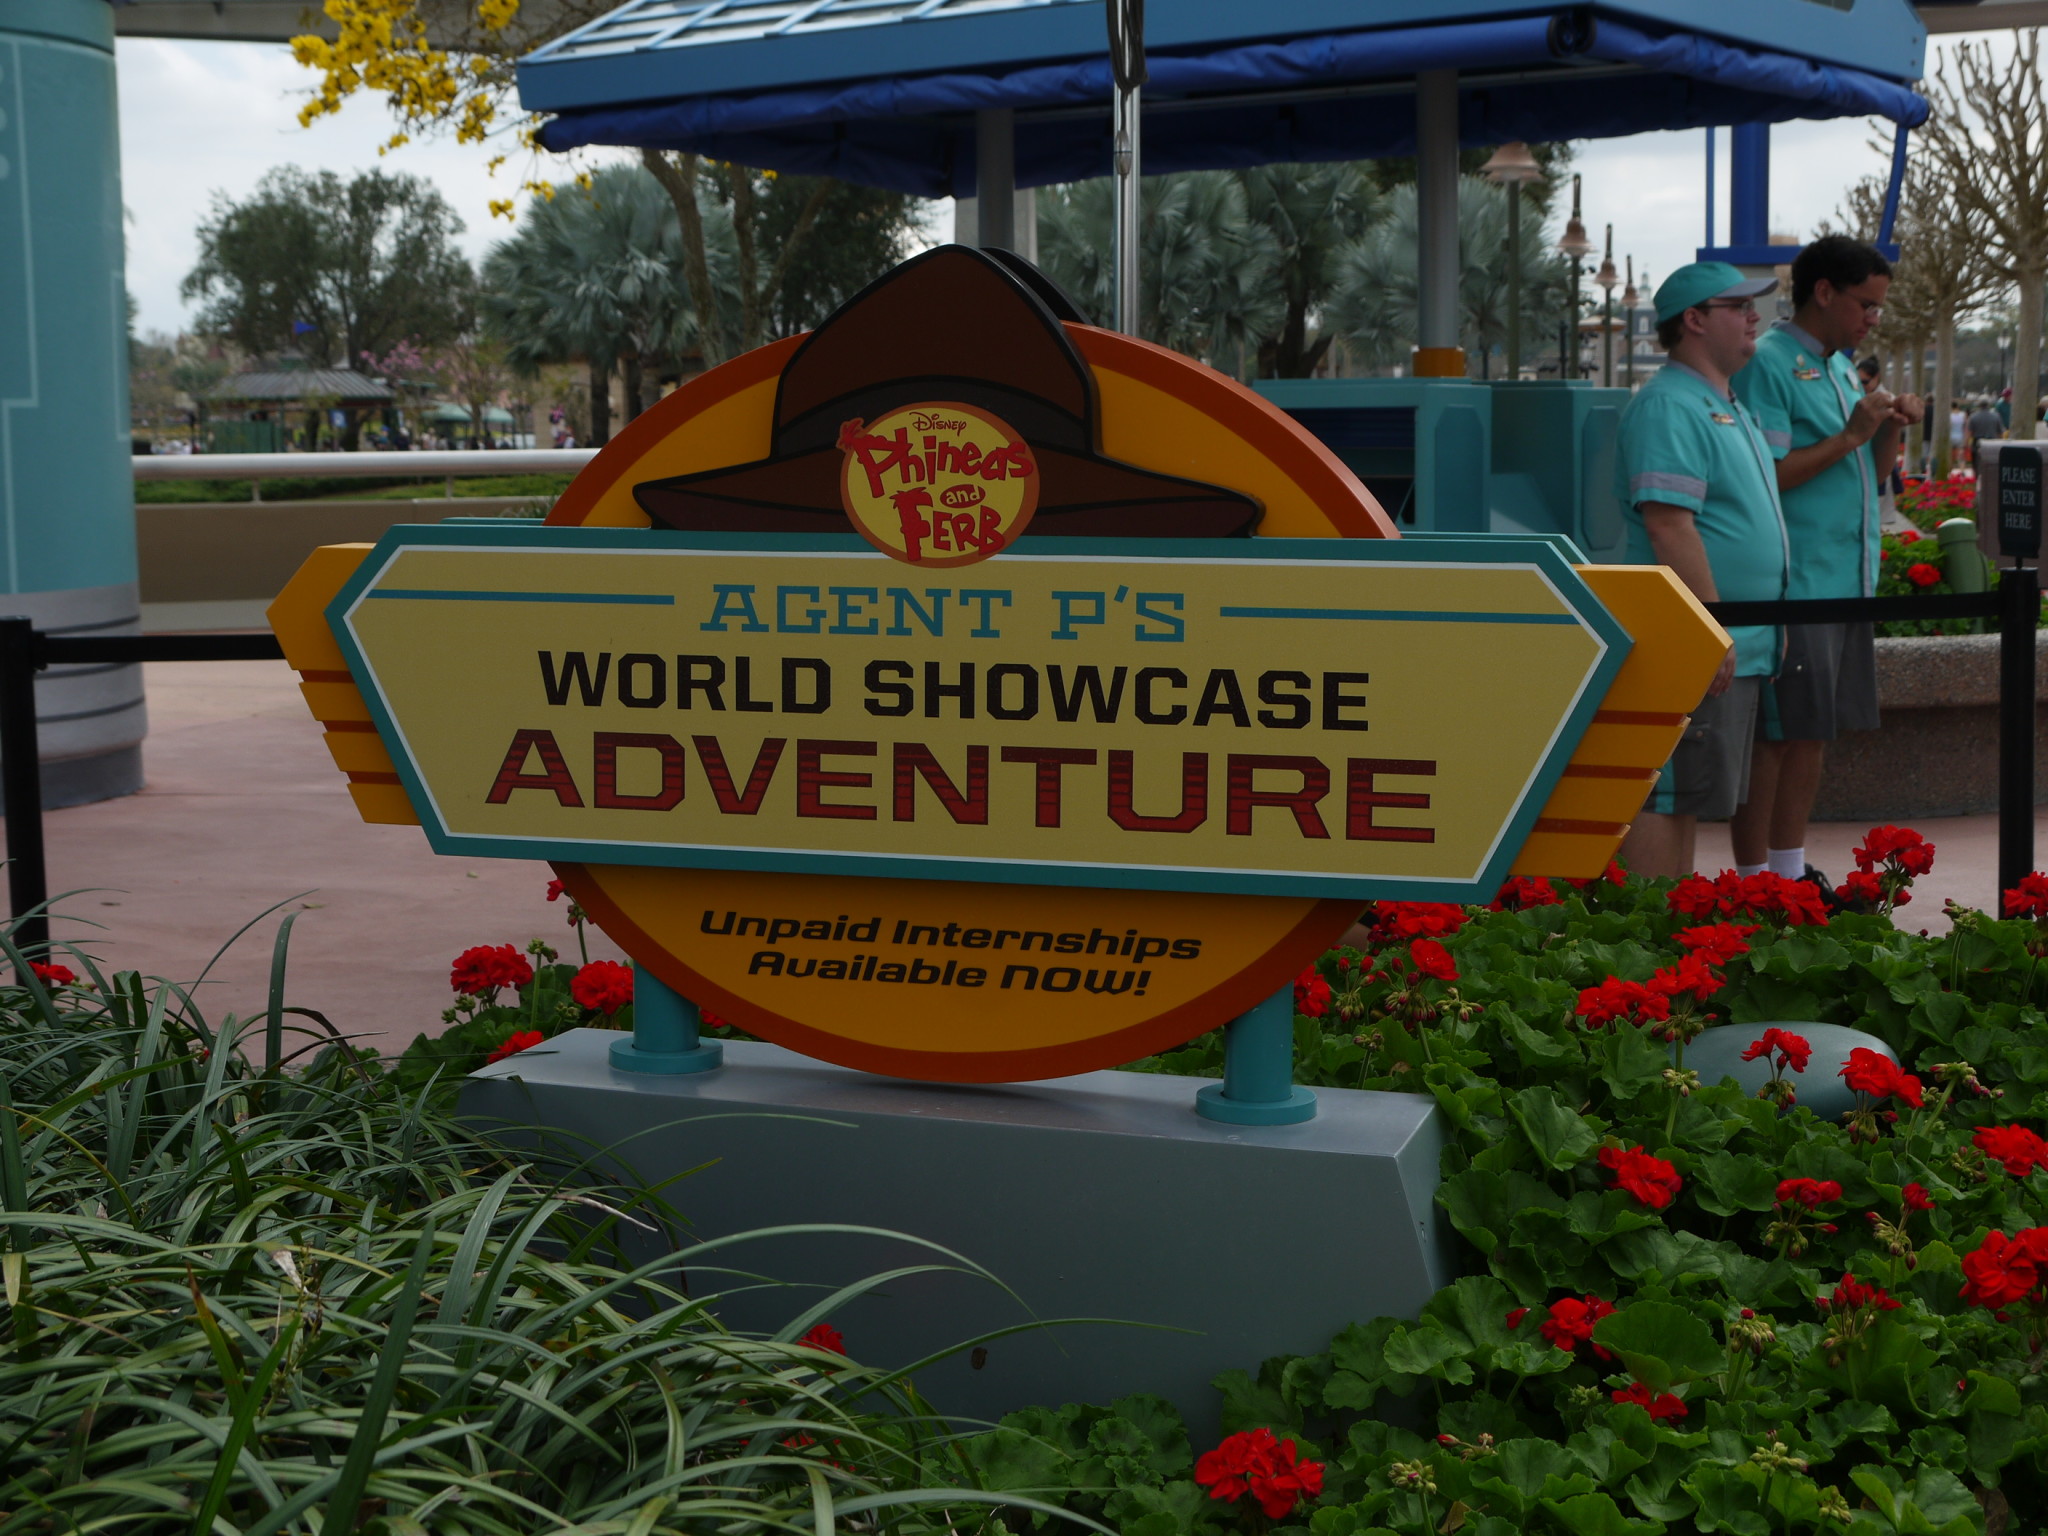 Participate in Agent P’s World Showcase Adventure Using Your Own Smartphone